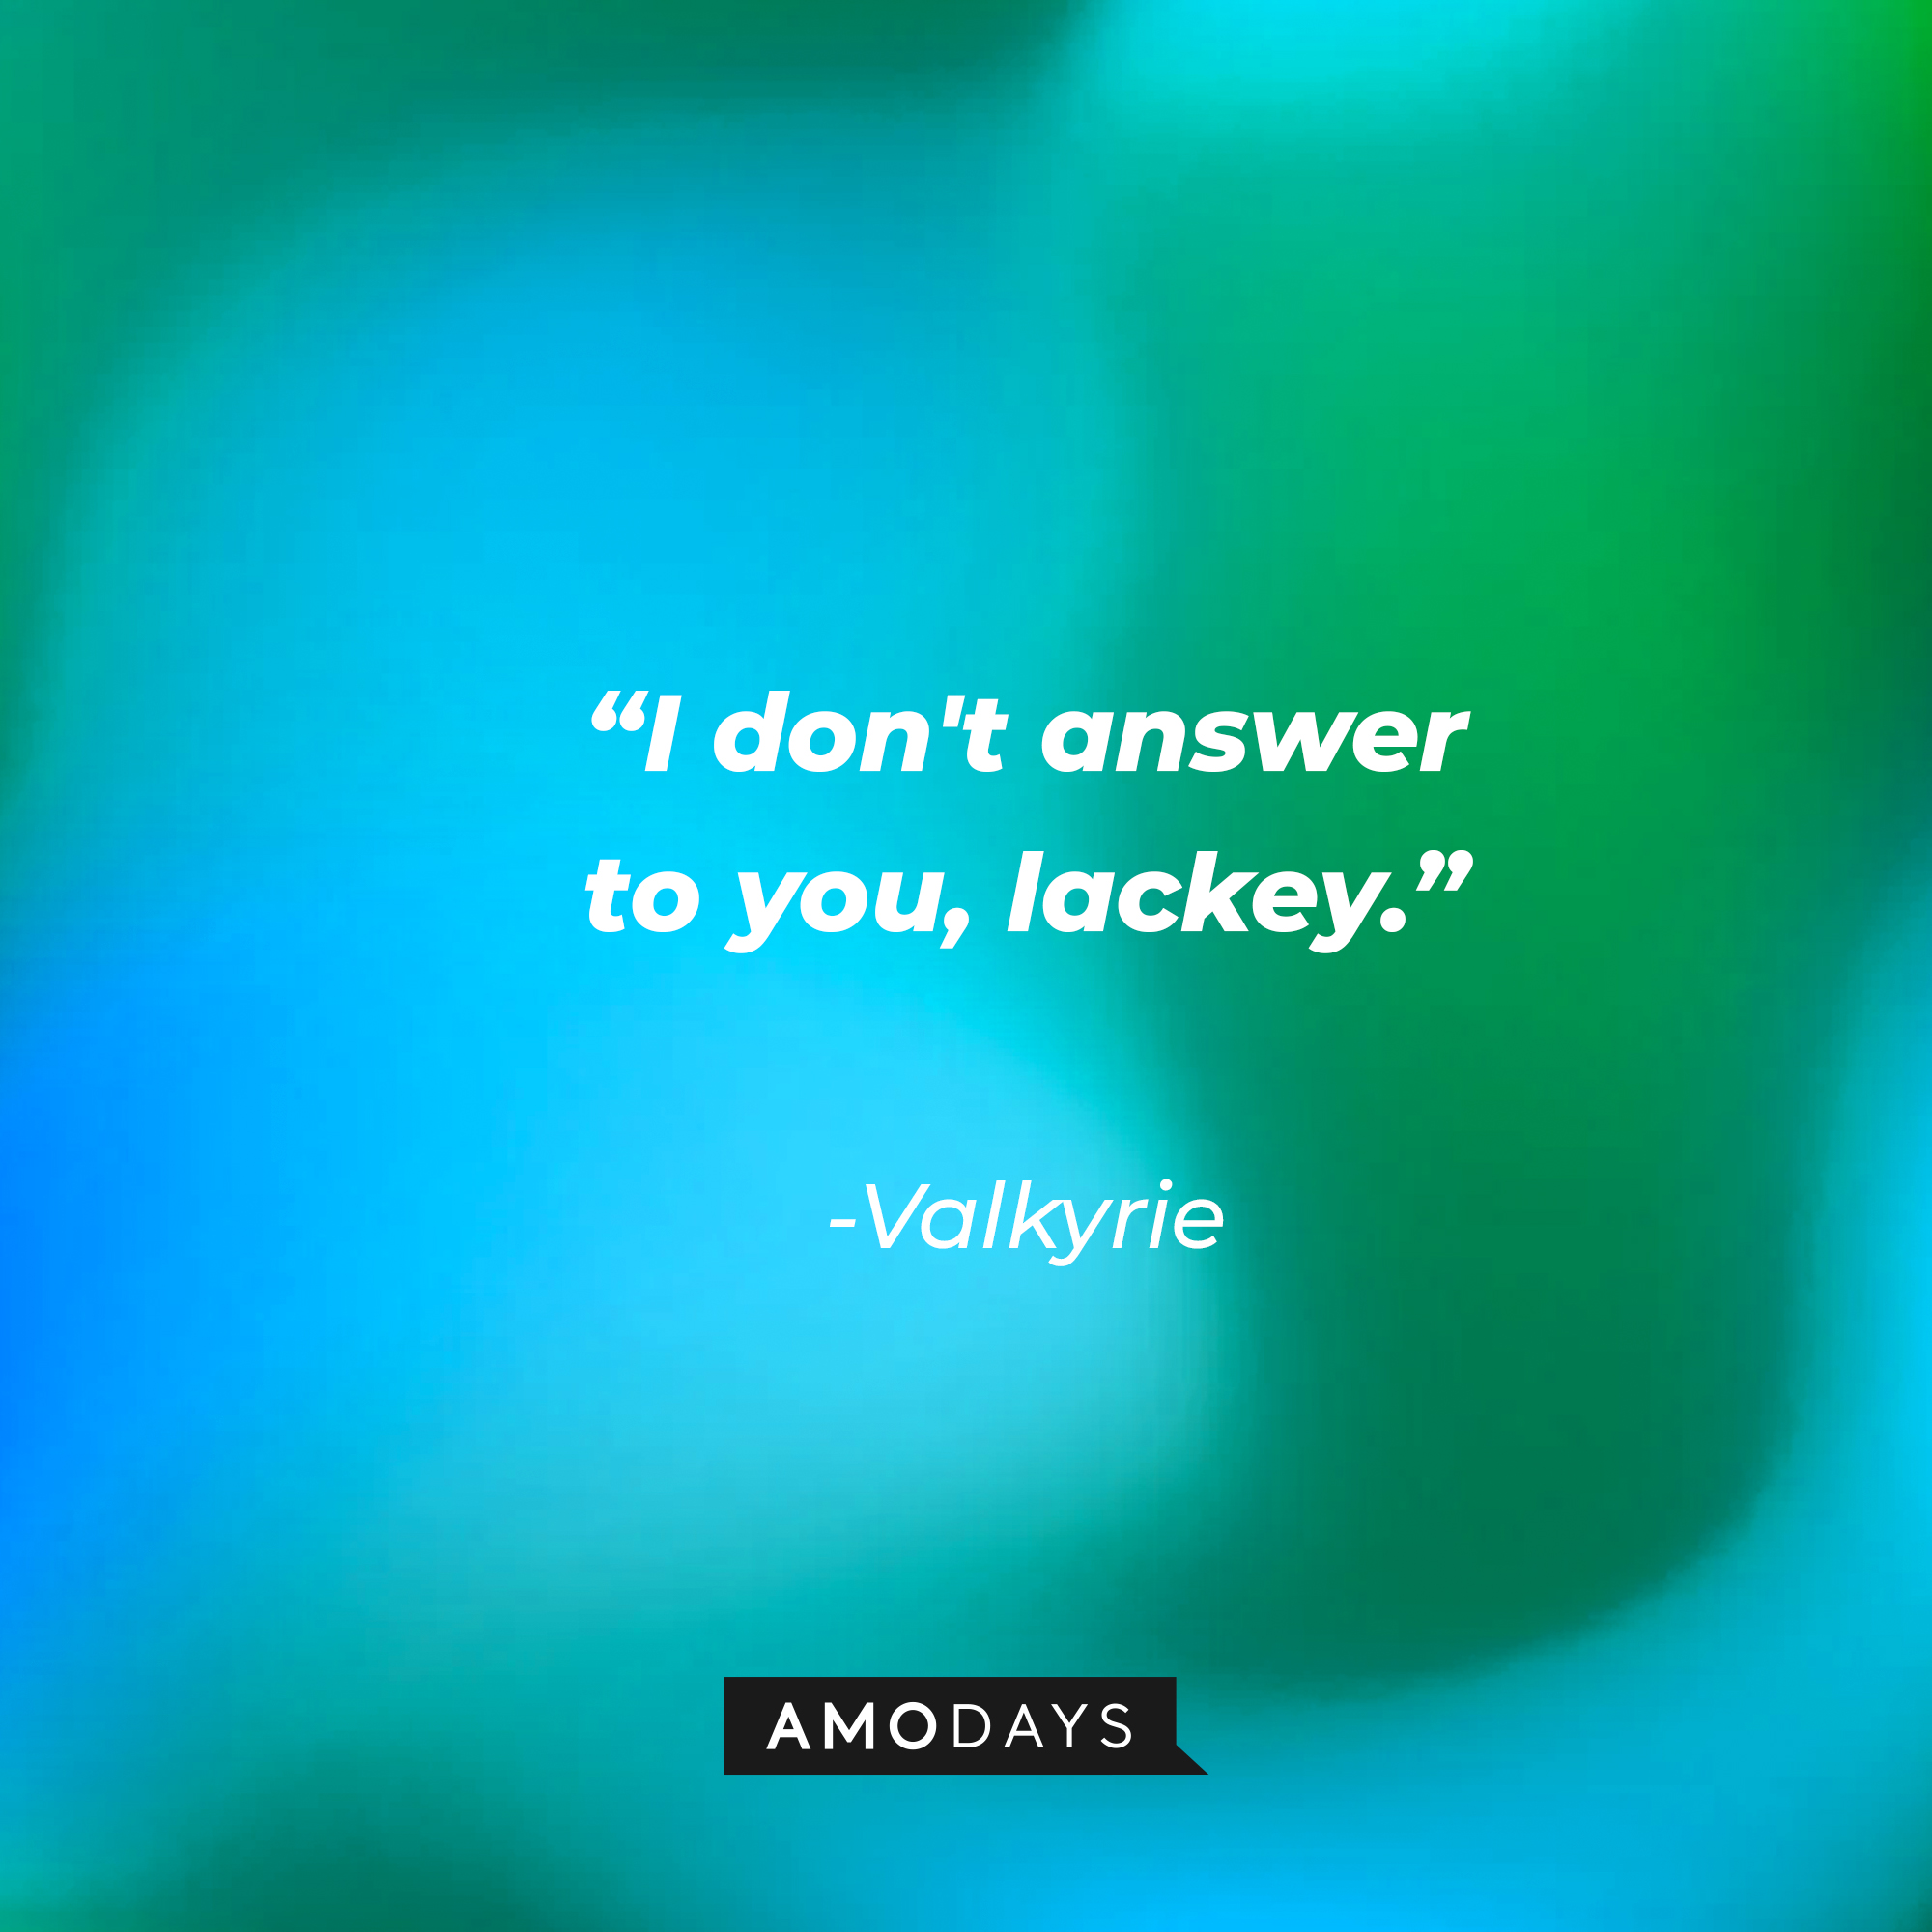 Valkyrie's quote: “I don't answer to you, lackey.” | Source: Amodays